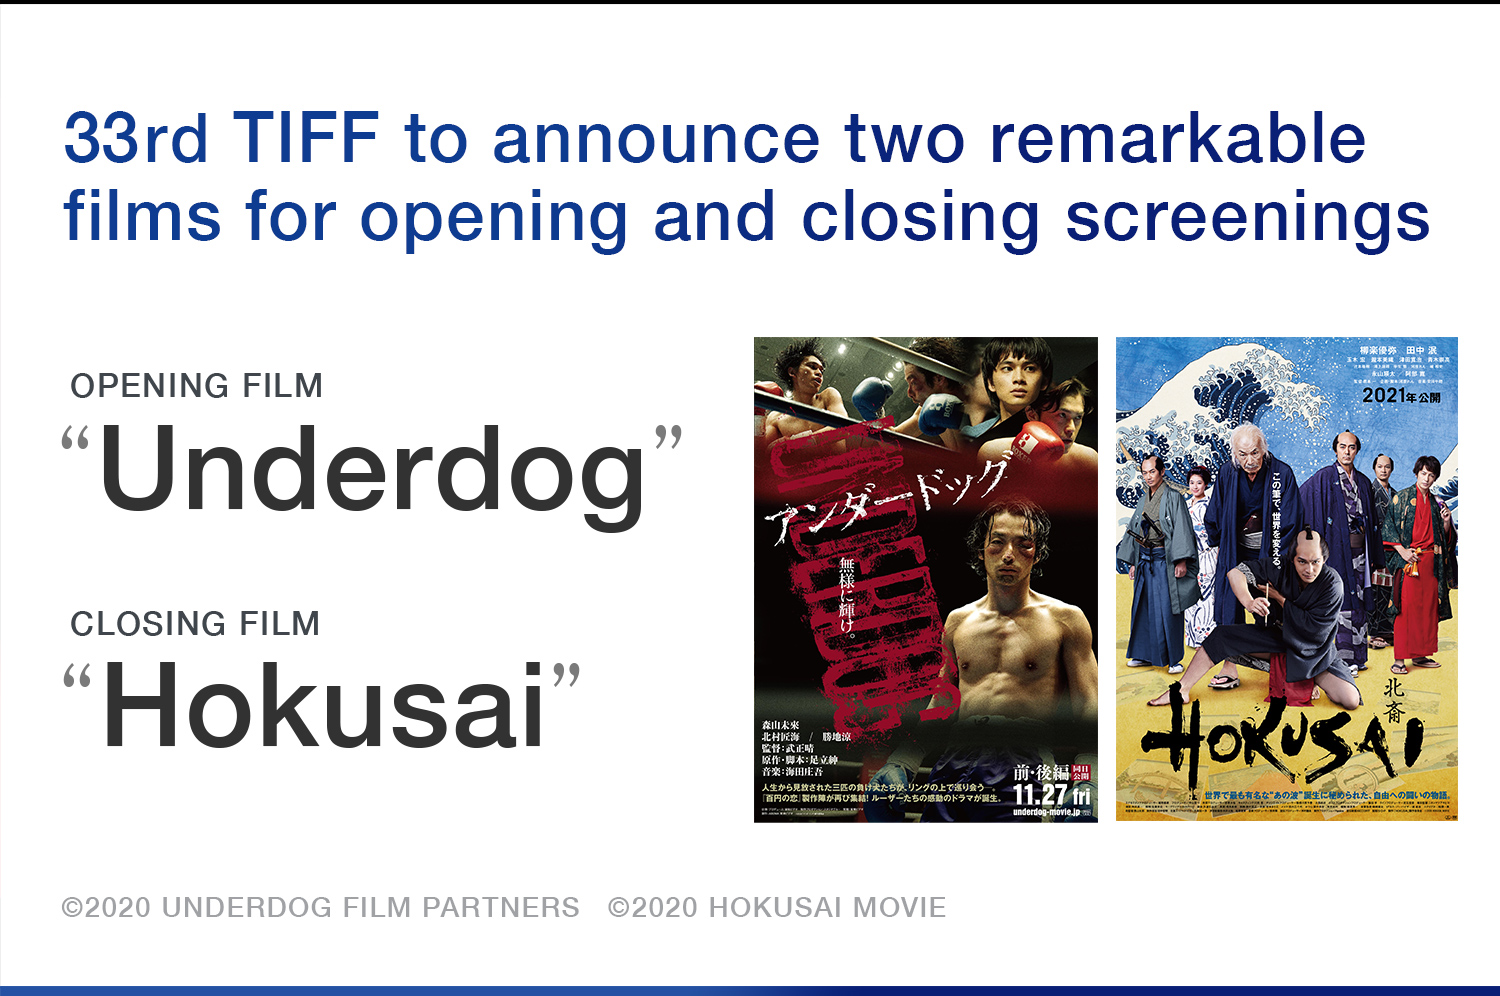 33rd TIFF to Open with “Underdog” and Close with “Hokusai”
